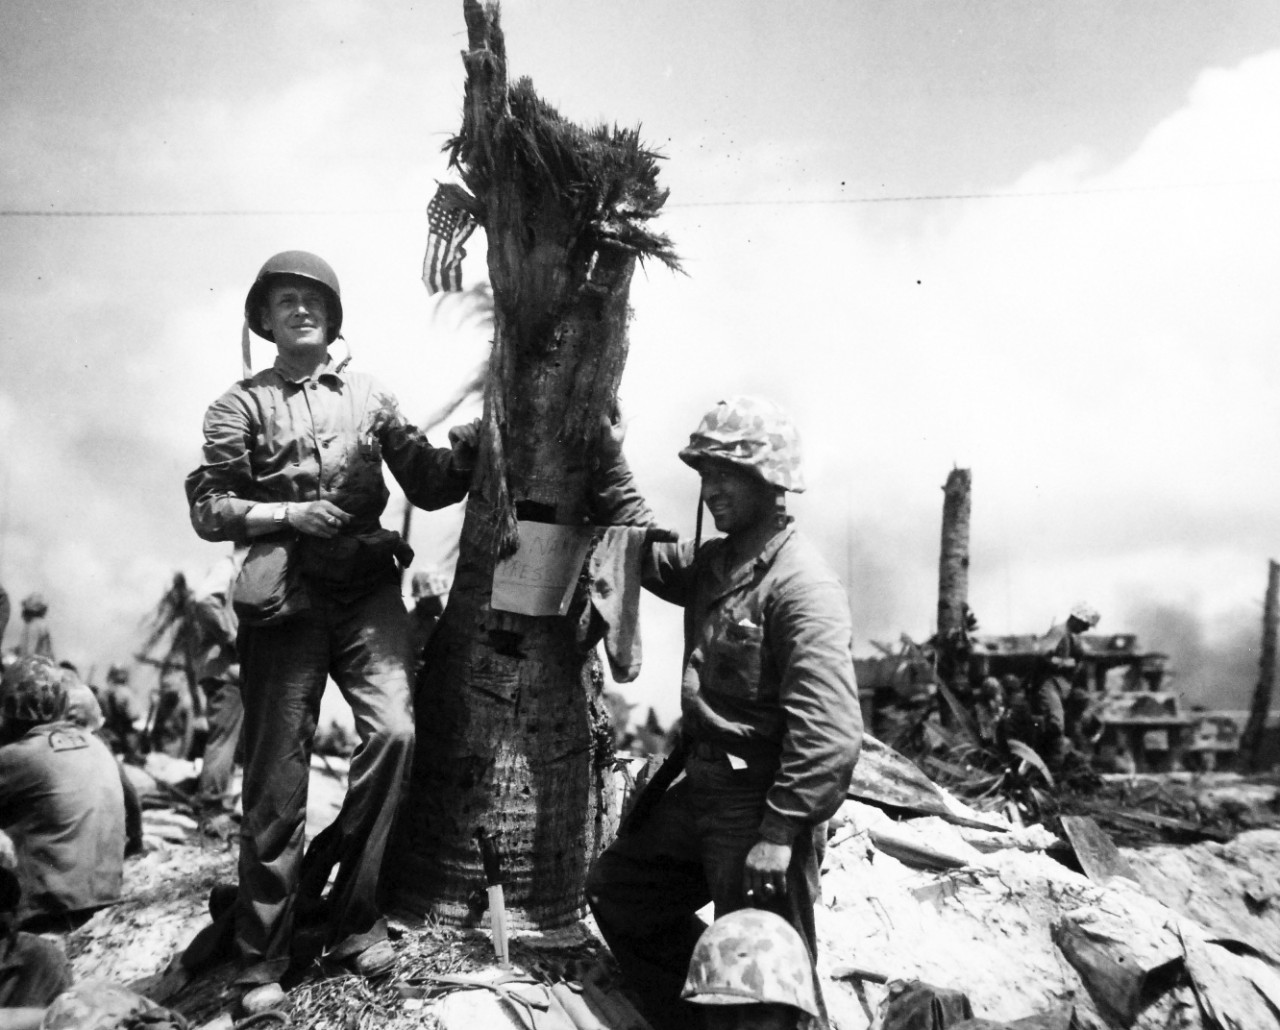 80-G-208987:  Operation Flintlock, January-February 1944.   Fourth Marine Division attack on Roi Island, Kwajalein Atoll, Marshall Islands, February 2, 1944.   Shown:  Lieutenant Colonel Donald L. Dickson puts up flag on cocoanut stump. Sign says Namur Press Office.  On right is Staff Sergeant Martin Kivel, a Marine Corps Combat Correspondent.    Official U.S. Navy photograph, now in the collections of the National Archives.  (2017/07/25).  